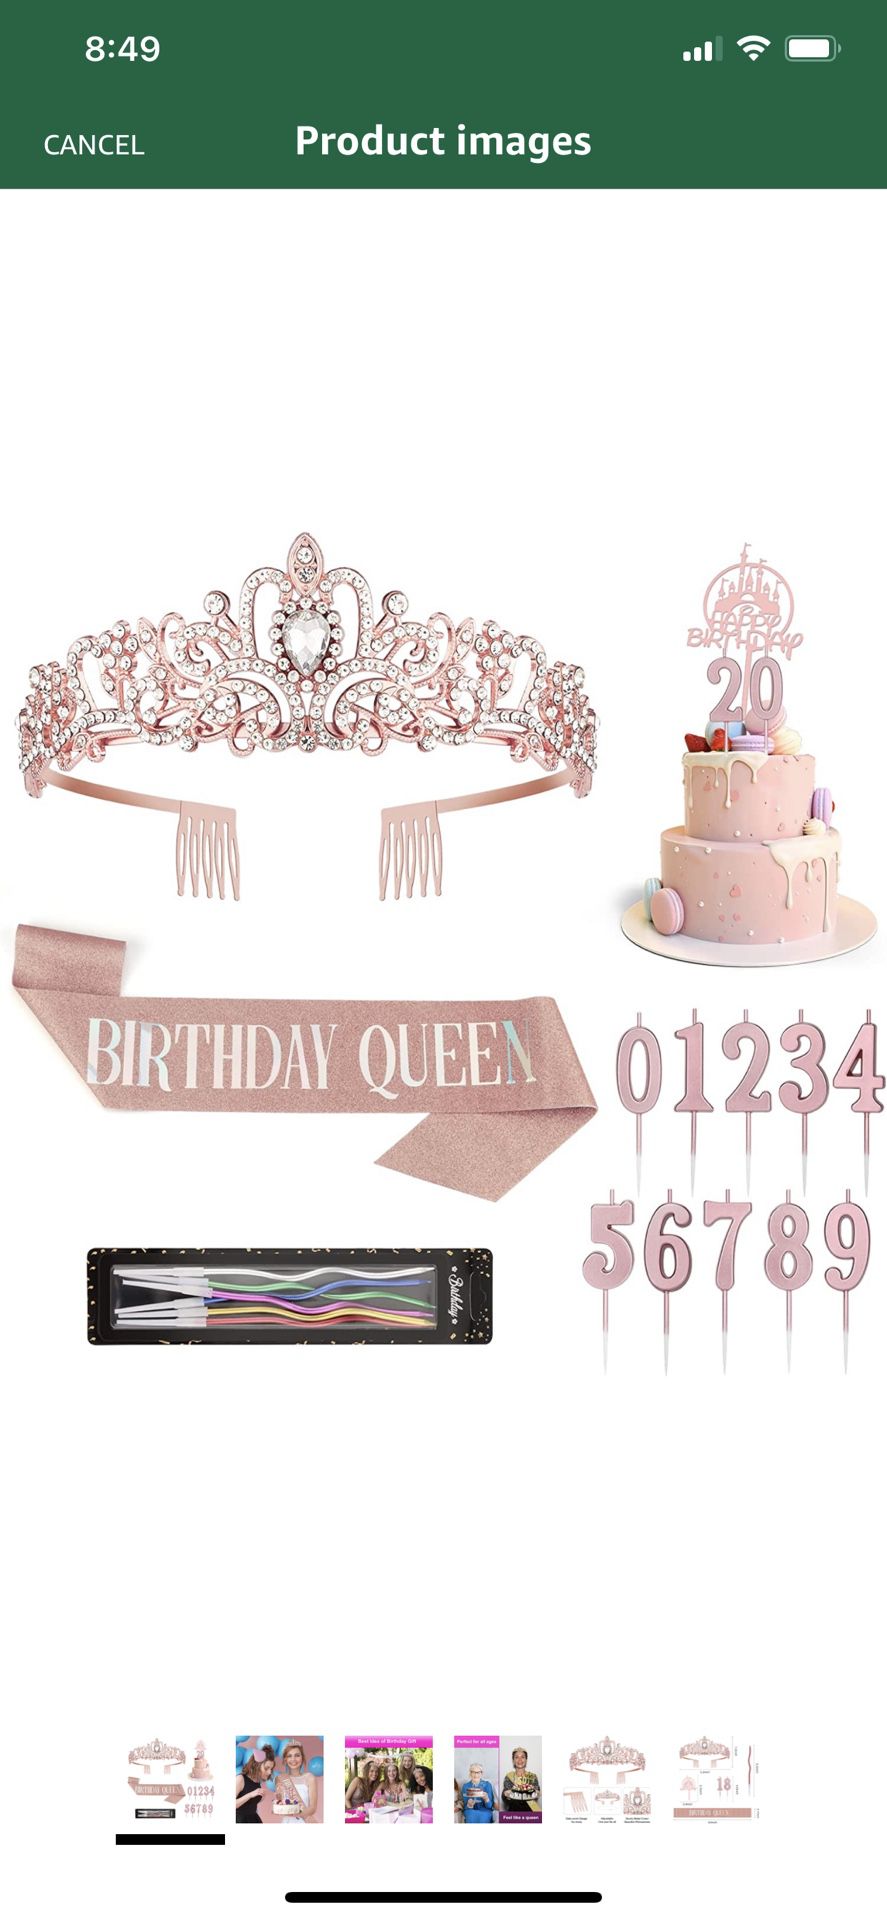 Birthday Decorations for Women, 5 pcs Birthday Sash and Tiaras Kit, Princess Party Decorations for All Ages, Including Crown/Tiara, Sash, Numeral and 